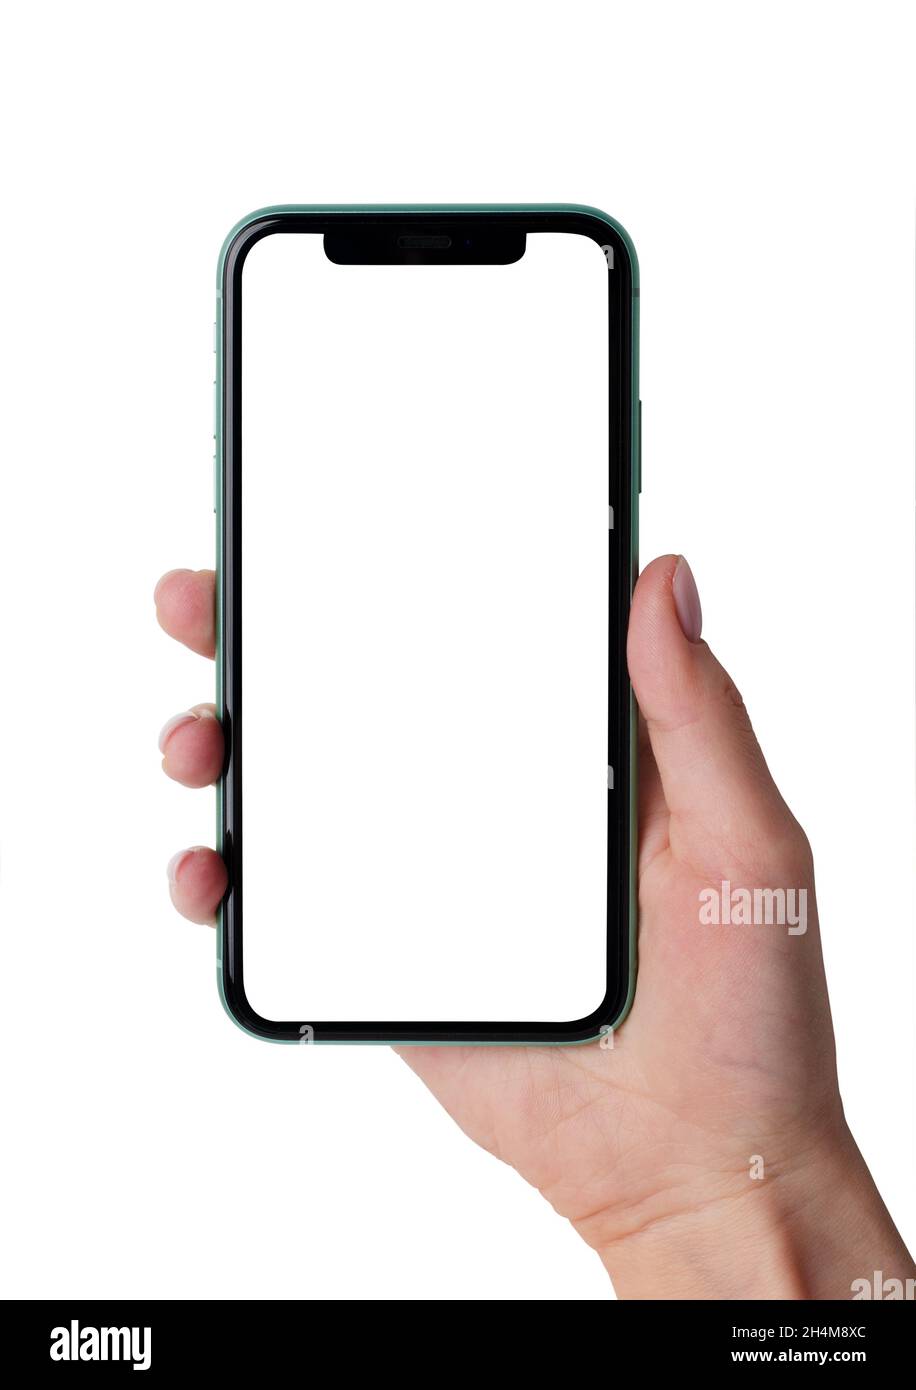 Moscow, Russia - June 18, 2020: Green Apple iPhone 11 mock up in a female hand isolated on a white background. Close-up of a new smartphone from Apple Stock Photo